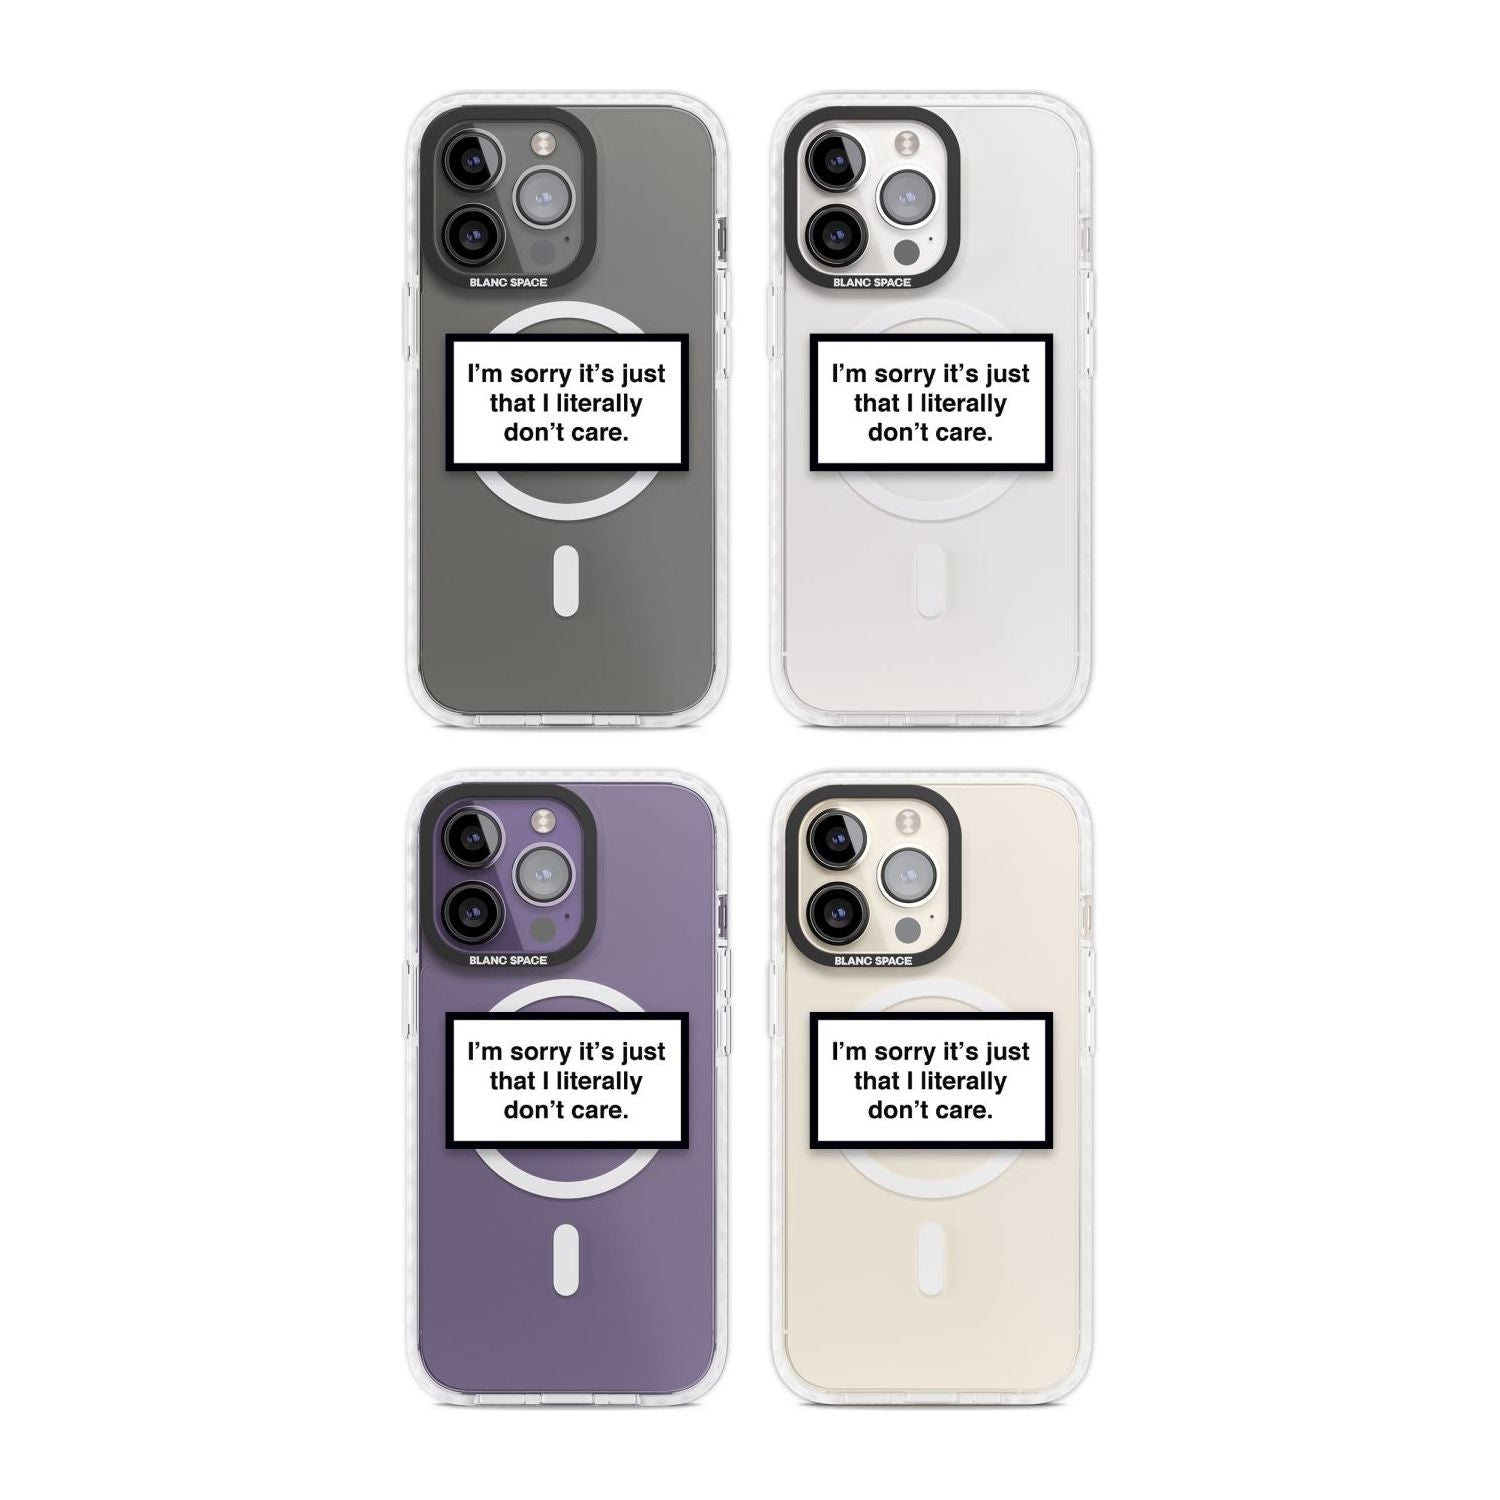 I Literally Don't Care Phone Case iPhone 15 Pro Max / Black Impact Case,iPhone 15 Plus / Black Impact Case,iPhone 15 Pro / Black Impact Case,iPhone 15 / Black Impact Case,iPhone 15 Pro Max / Impact Case,iPhone 15 Plus / Impact Case,iPhone 15 Pro / Impact Case,iPhone 15 / Impact Case,iPhone 15 Pro Max / Magsafe Black Impact Case,iPhone 15 Plus / Magsafe Black Impact Case,iPhone 15 Pro / Magsafe Black Impact Case,iPhone 15 / Magsafe Black Impact Case,iPhone 14 Pro Max / Black Impact Case,iPhone 14 Plus / Blac